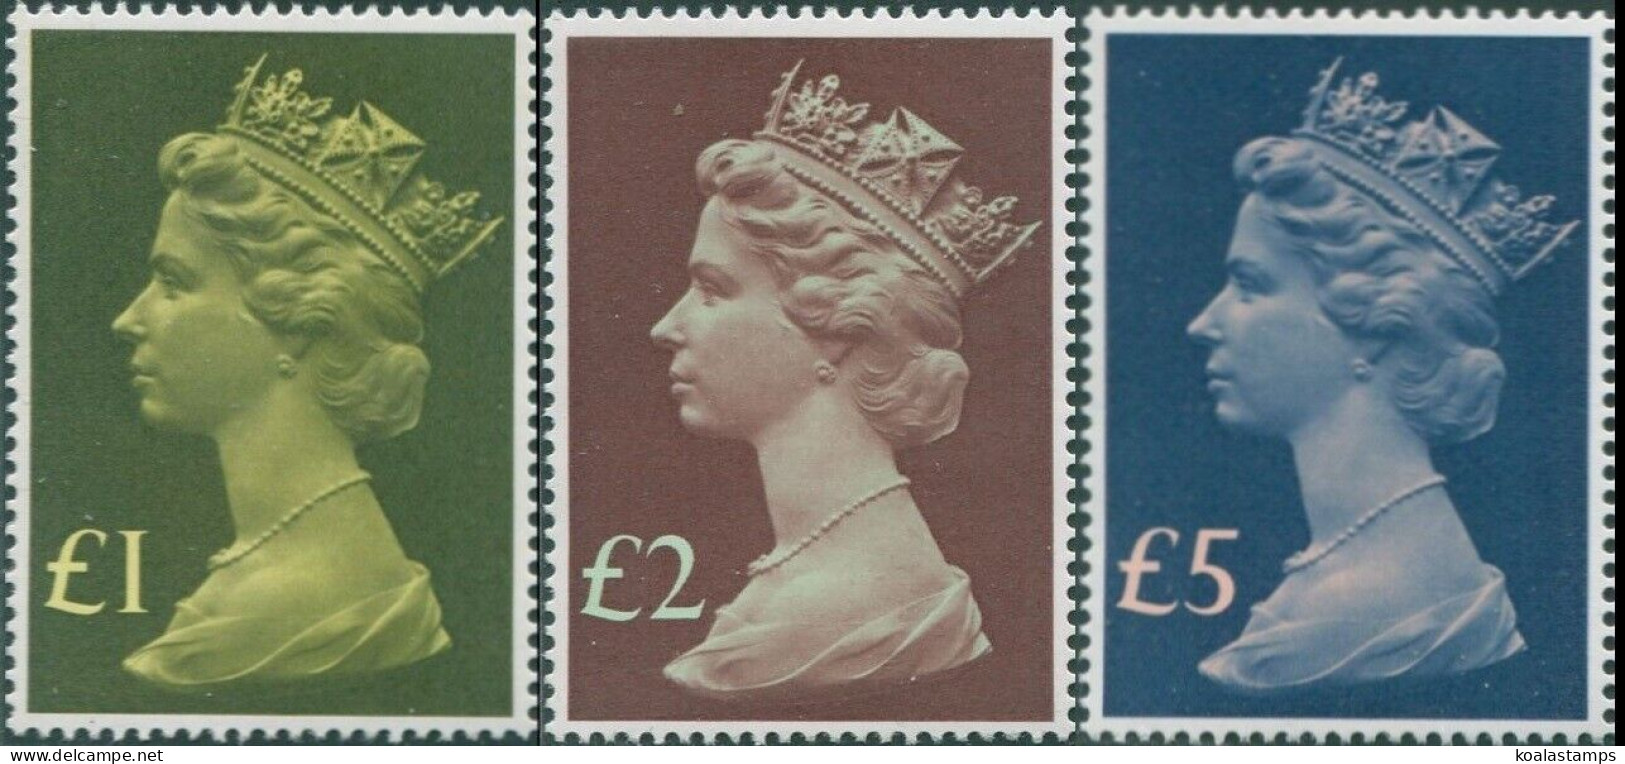 Great Britain 1977 SG1026-1028 QEII High Values (3) MNH - Unclassified